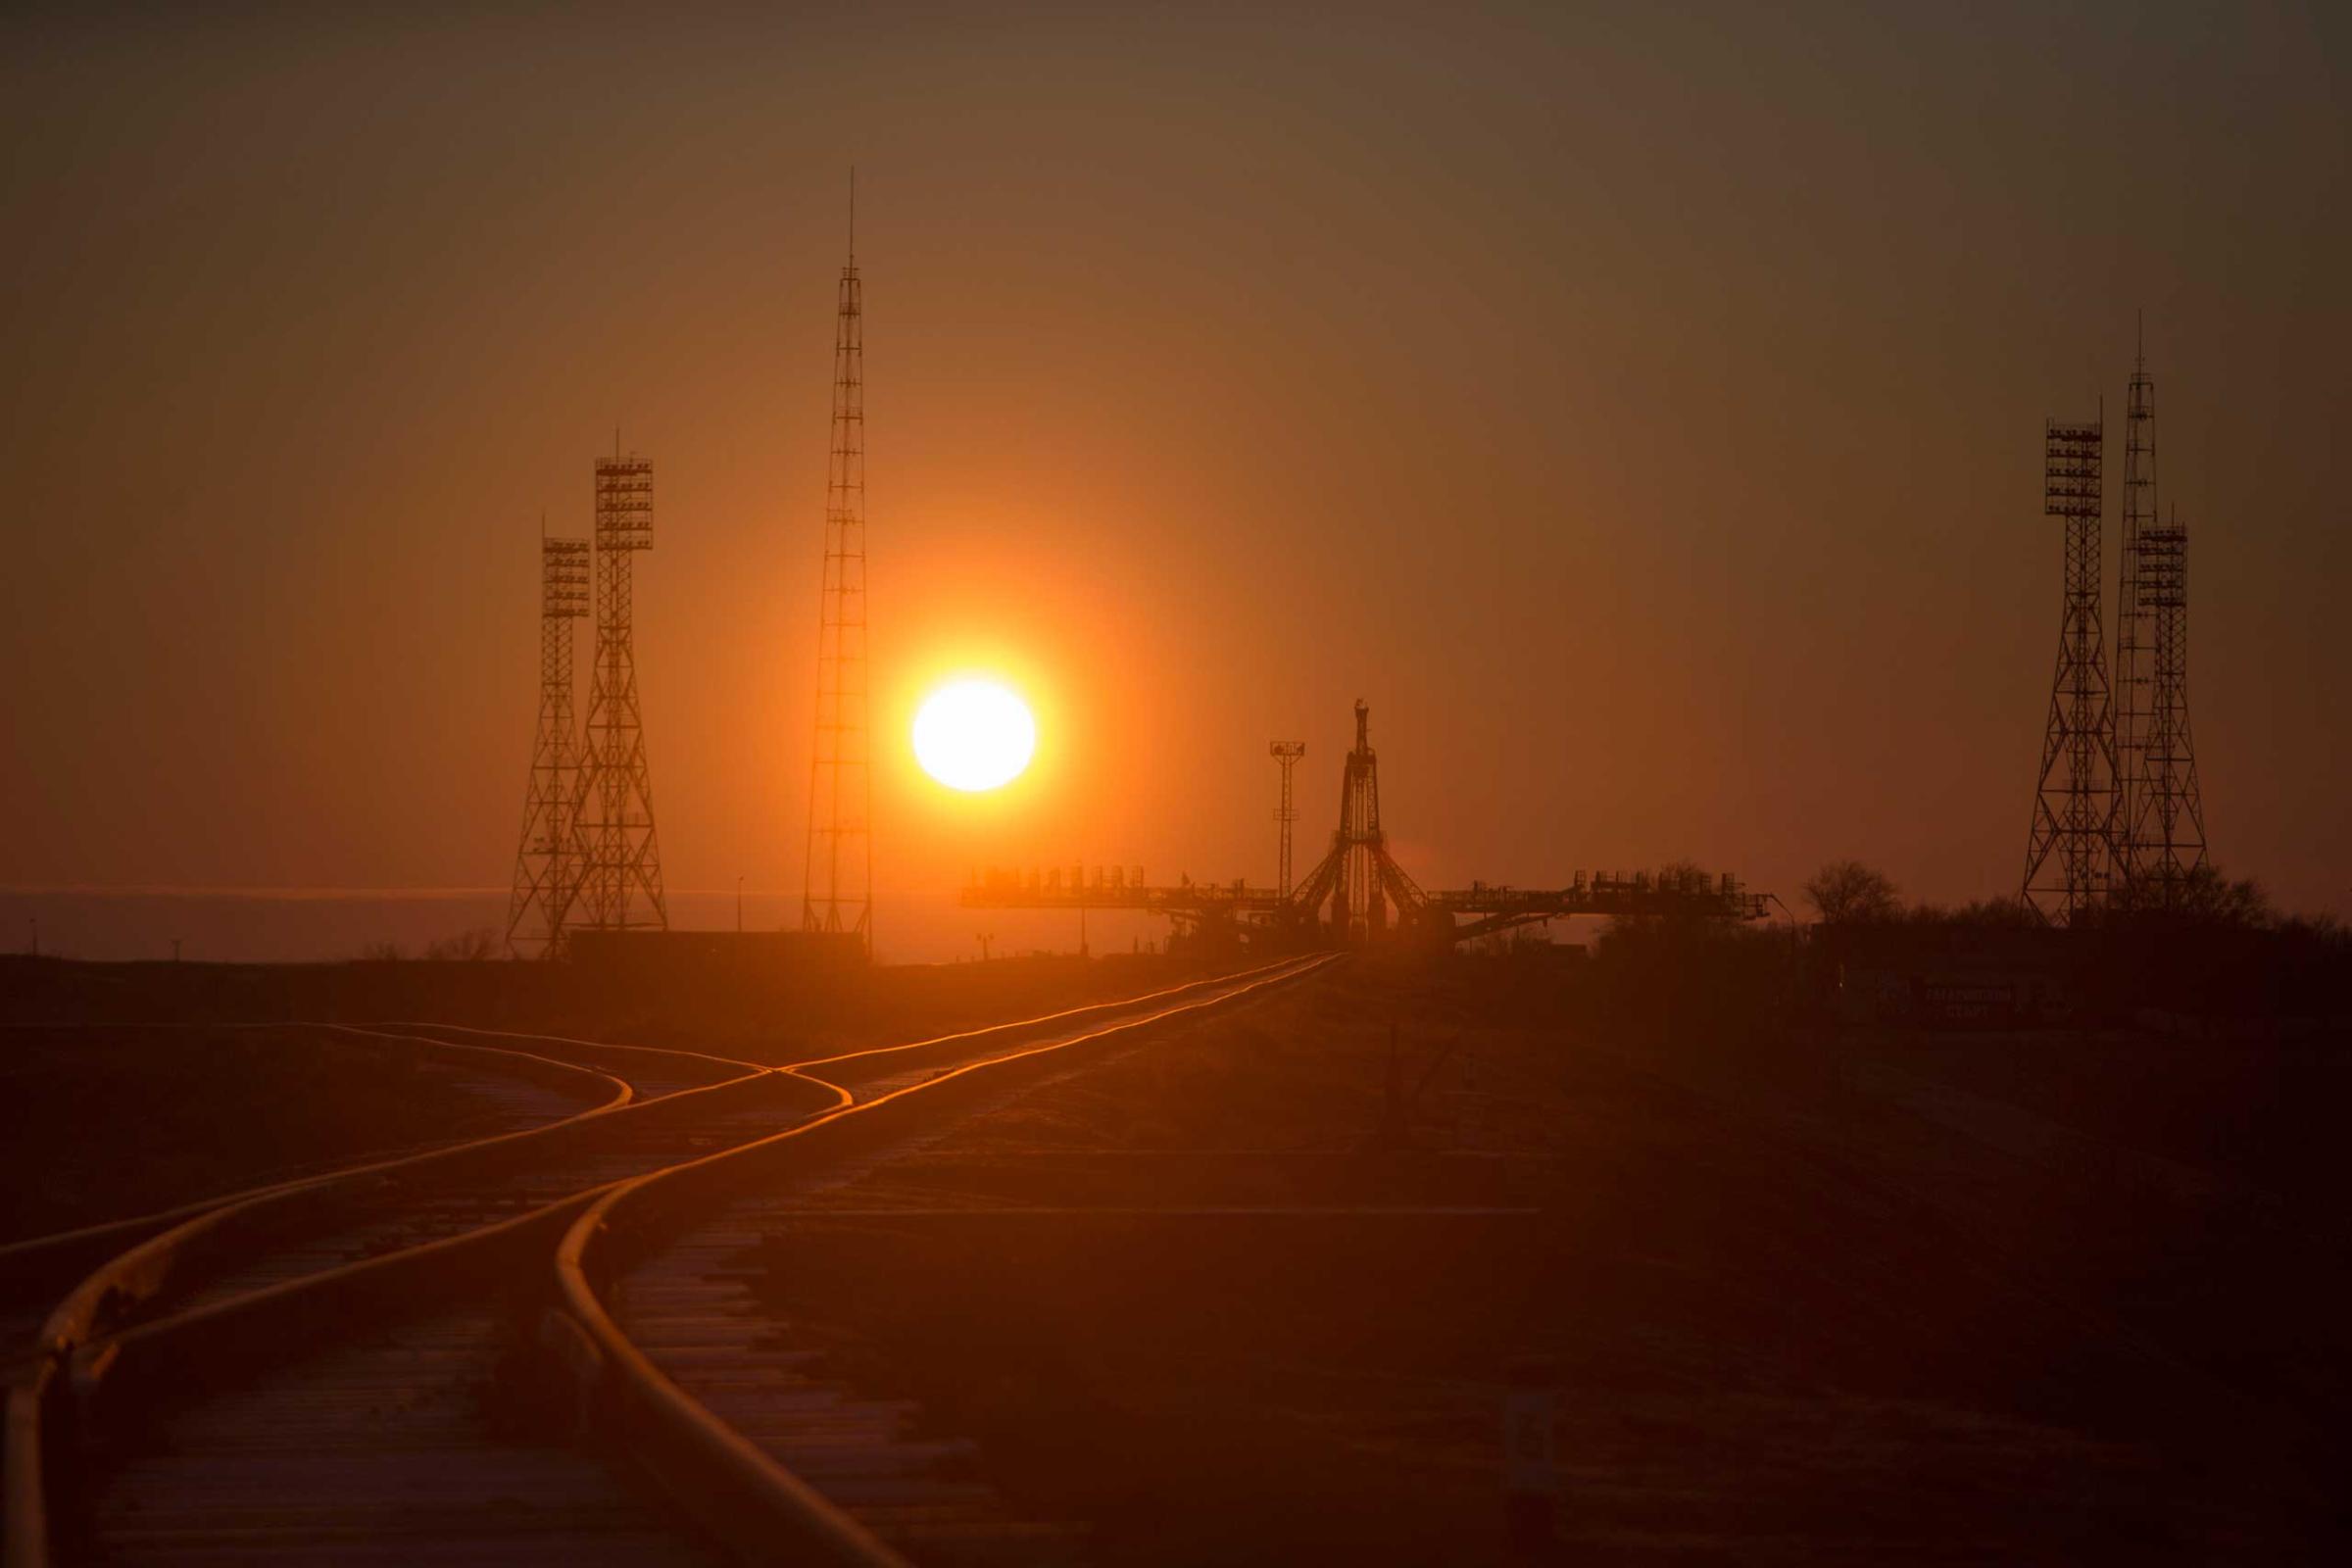 The sunrise silhouettes the structure that helps stabilize and service the Soyuz at the Baikonur Cosmodrome in Kazakhstan on Wednesday, March 25.